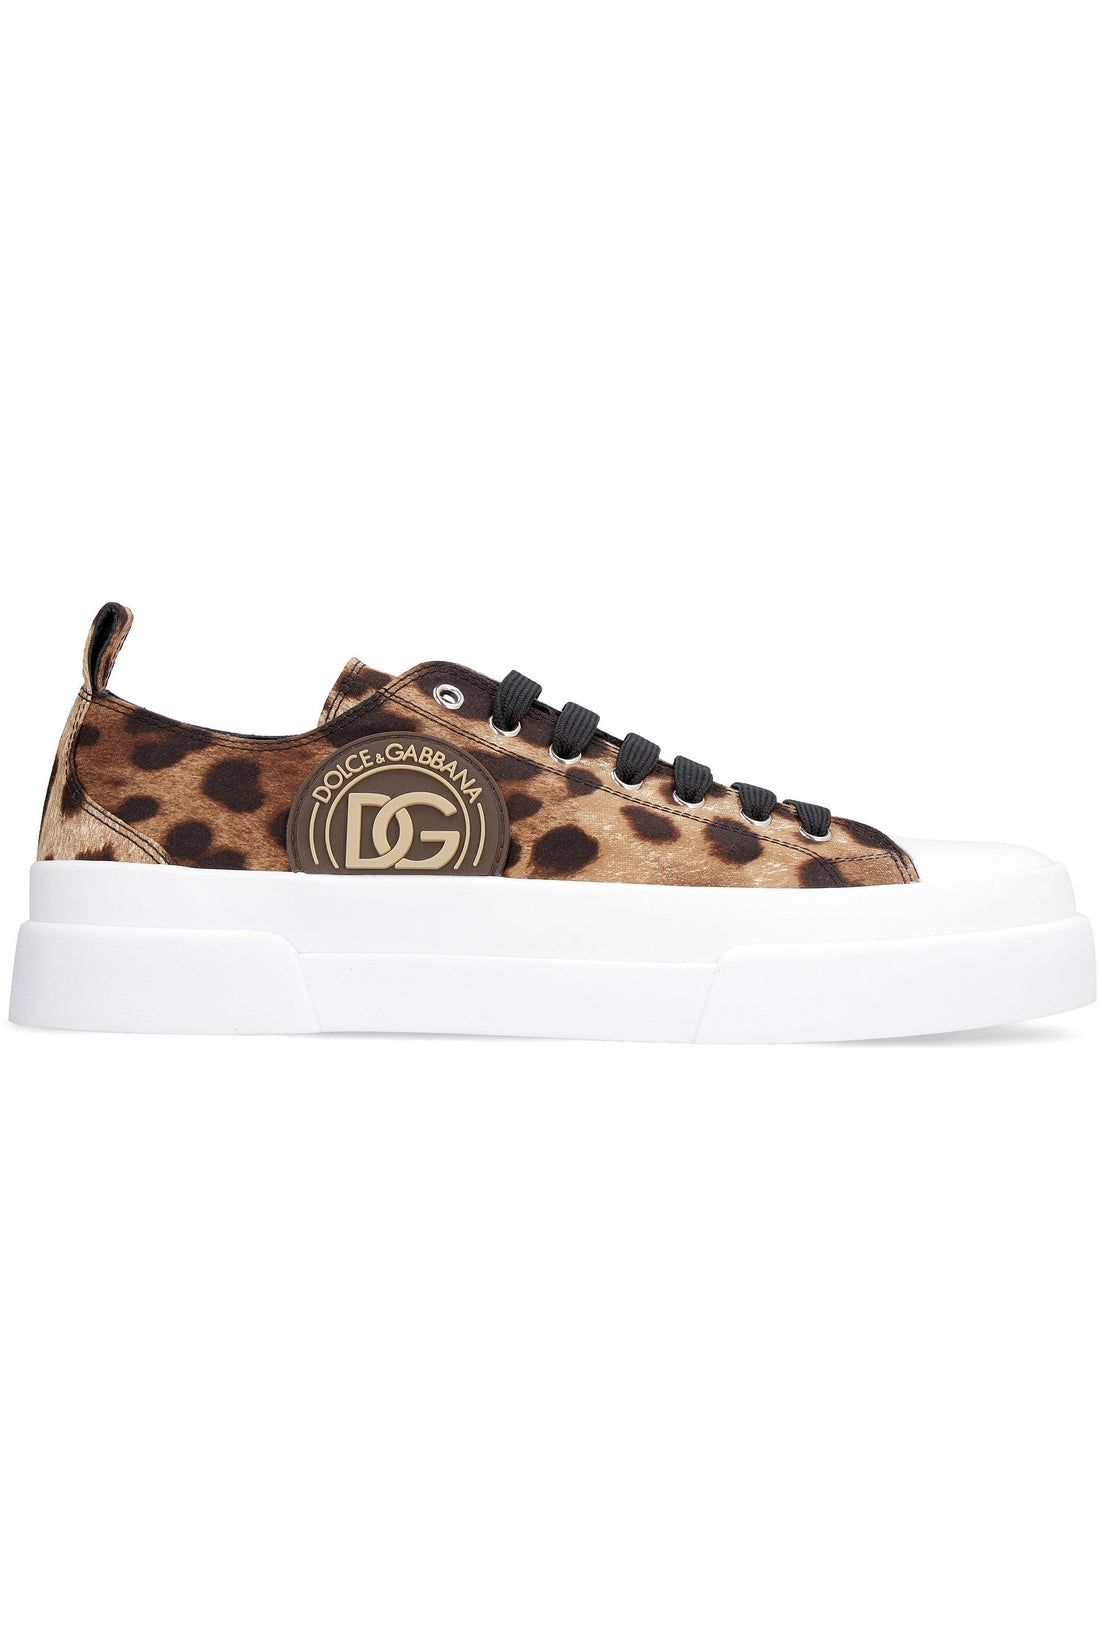 Dolce & Gabbana-OUTLET-SALE-Low-top sneakers-ARCHIVIST